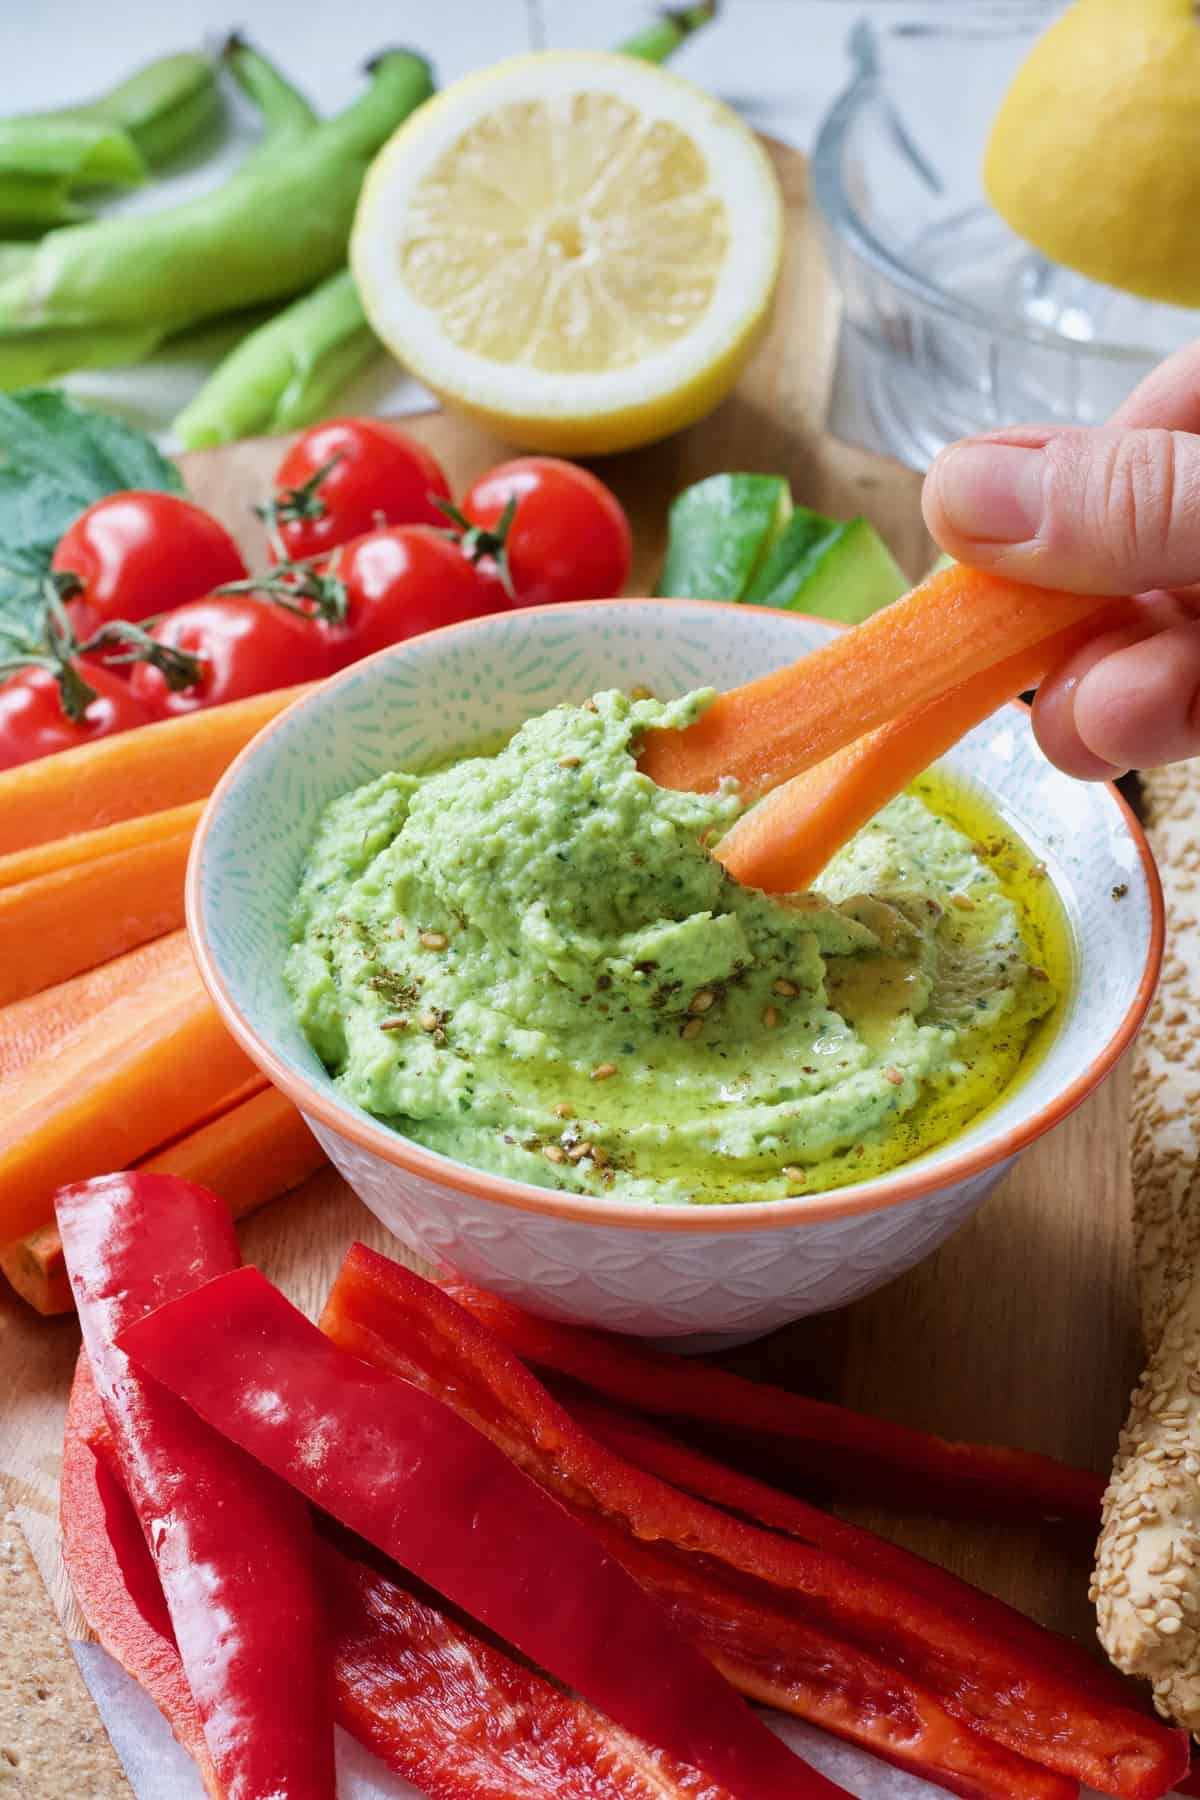 Two carrot sticks being dipped in a broad bean dip.